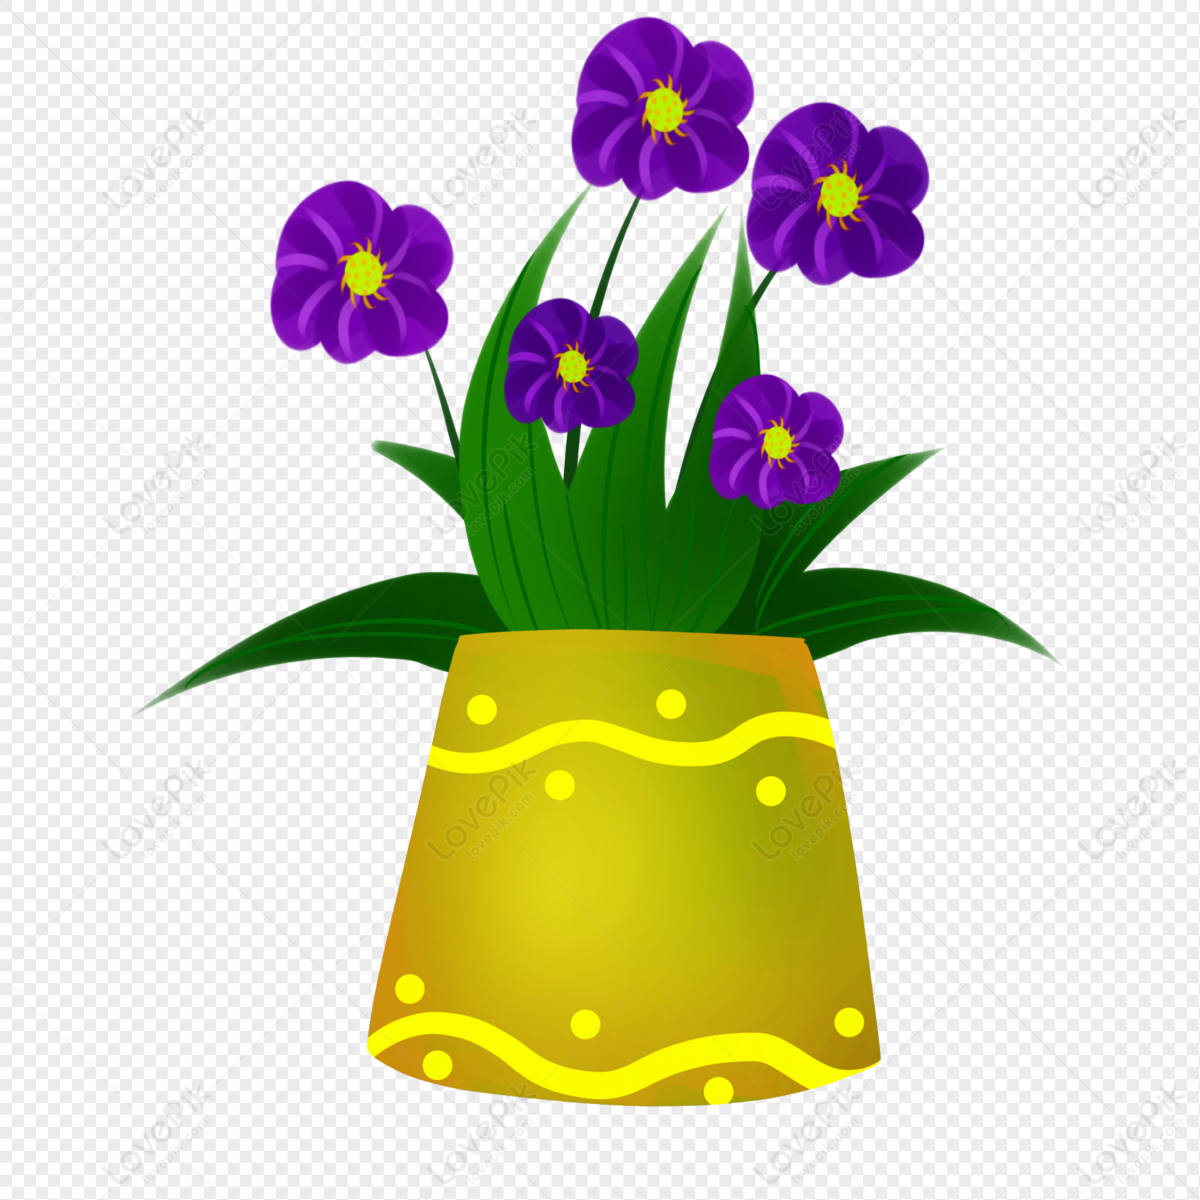 yellow and purple flower clipart